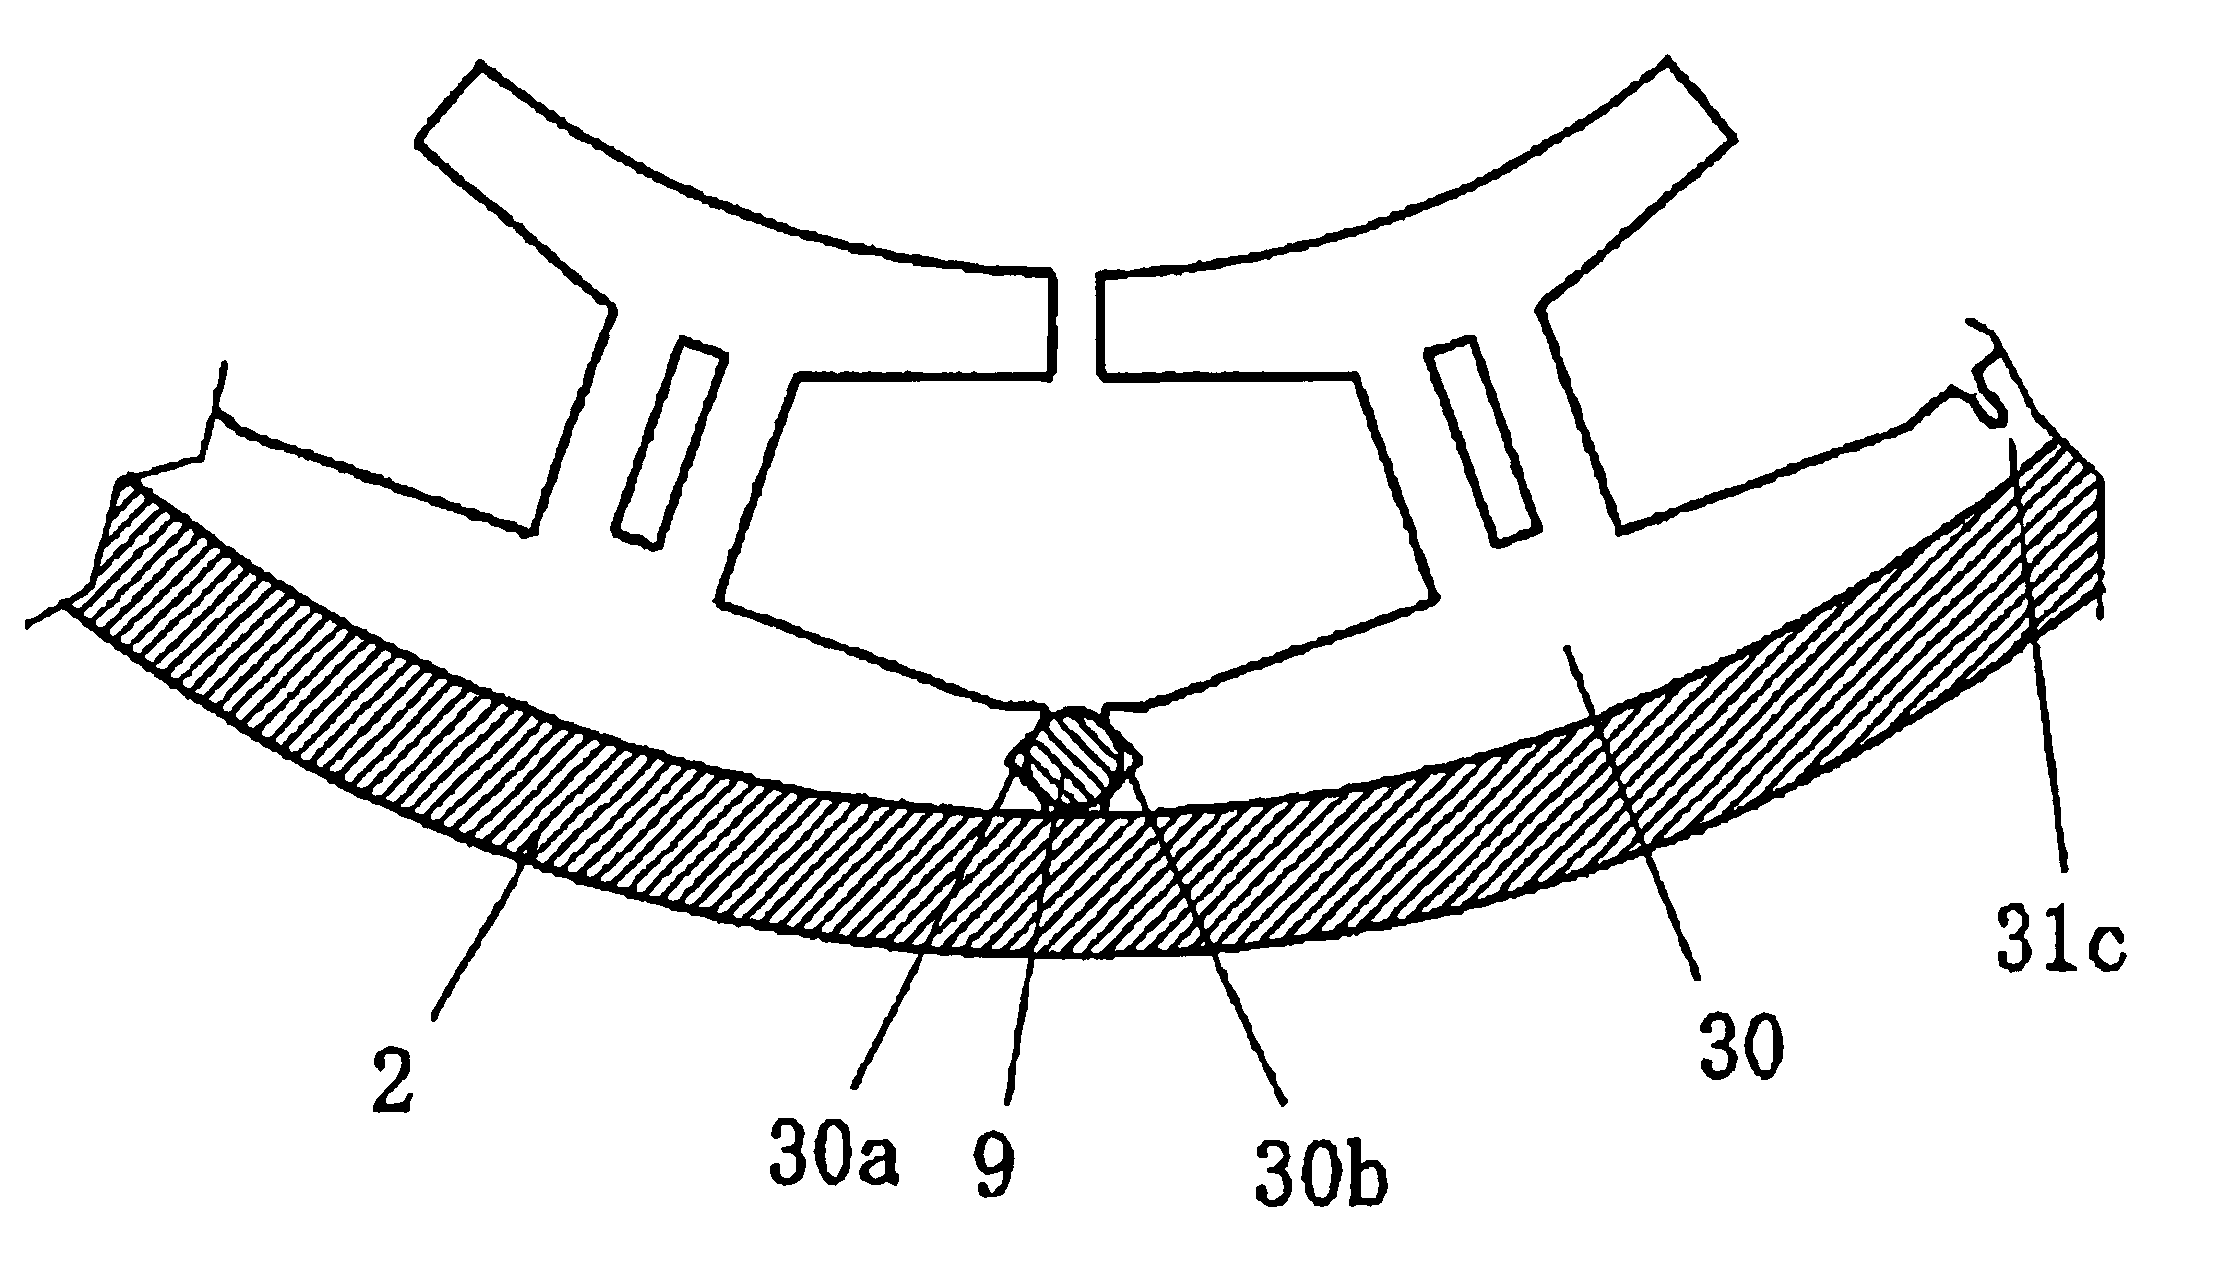 Method of installation of a laminated stator core stack in the motor casing